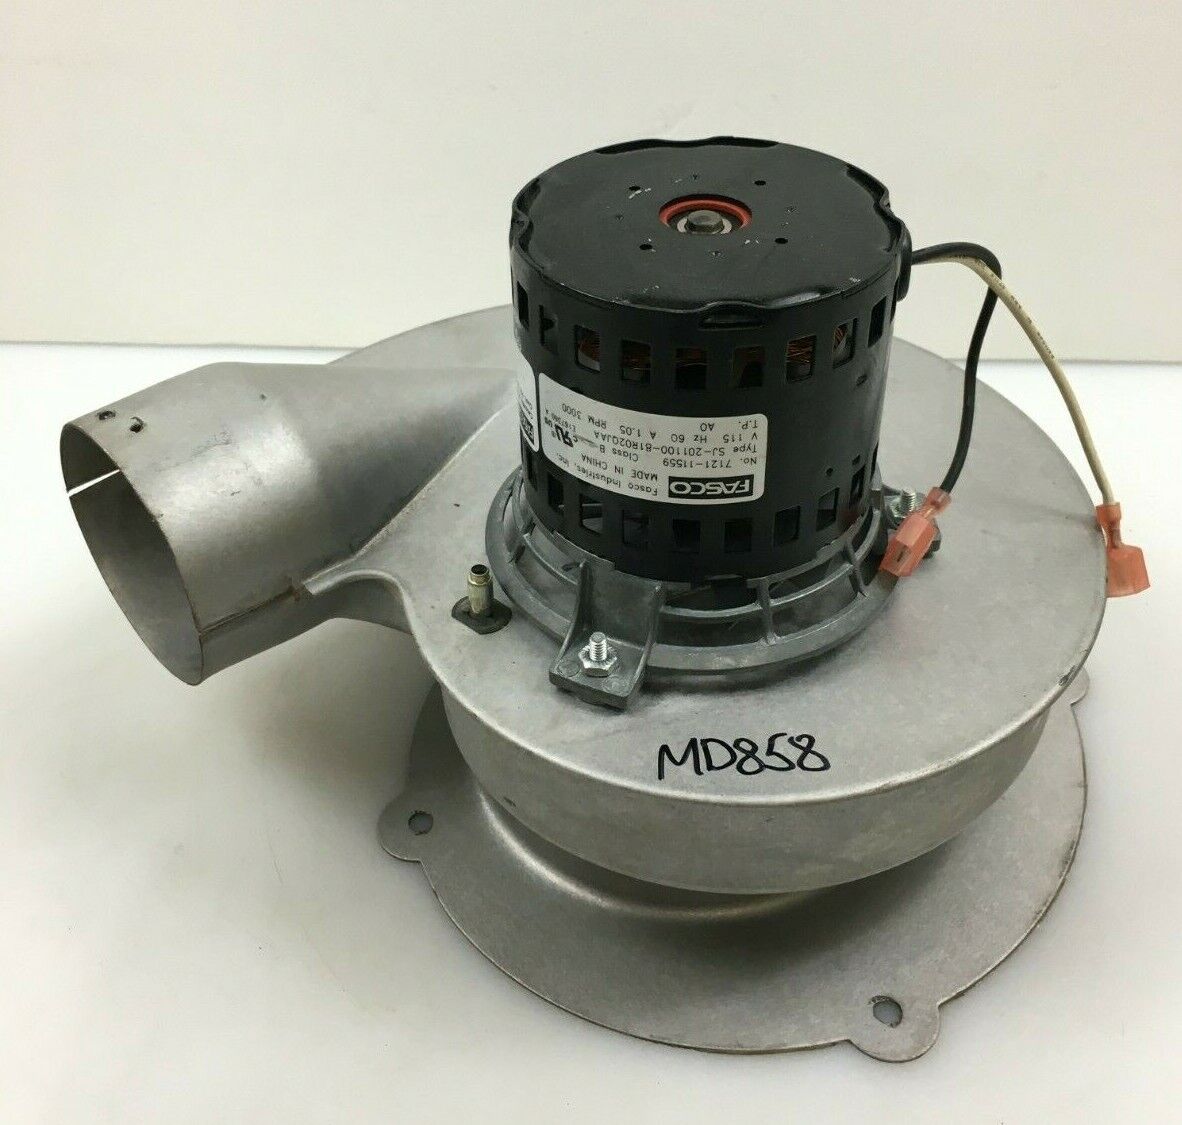 FASCO 7121-11559 Draft Inducer Blower Motor Assembly 3000 RPM 115V  used #MD858